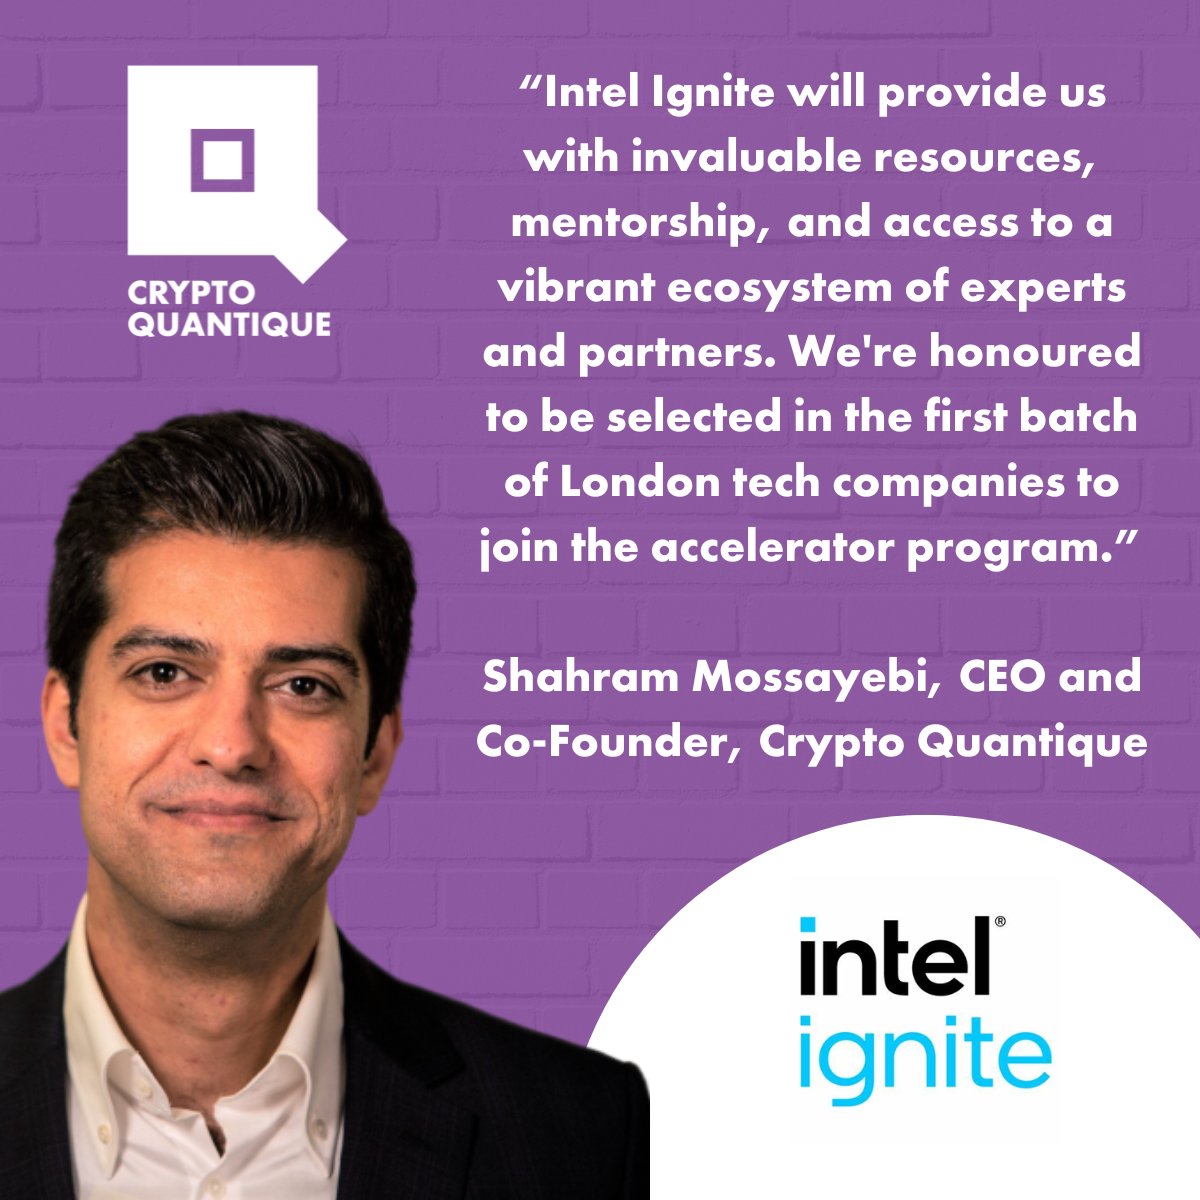 If you missed the news last week, Crypto Quantique has been selected to participate in the first-ever batch of the @IntelIgnite  accelerator program for early-stage deep tech startups in London!

#IntelIgnite #IamIntel #DeepTech #Startups